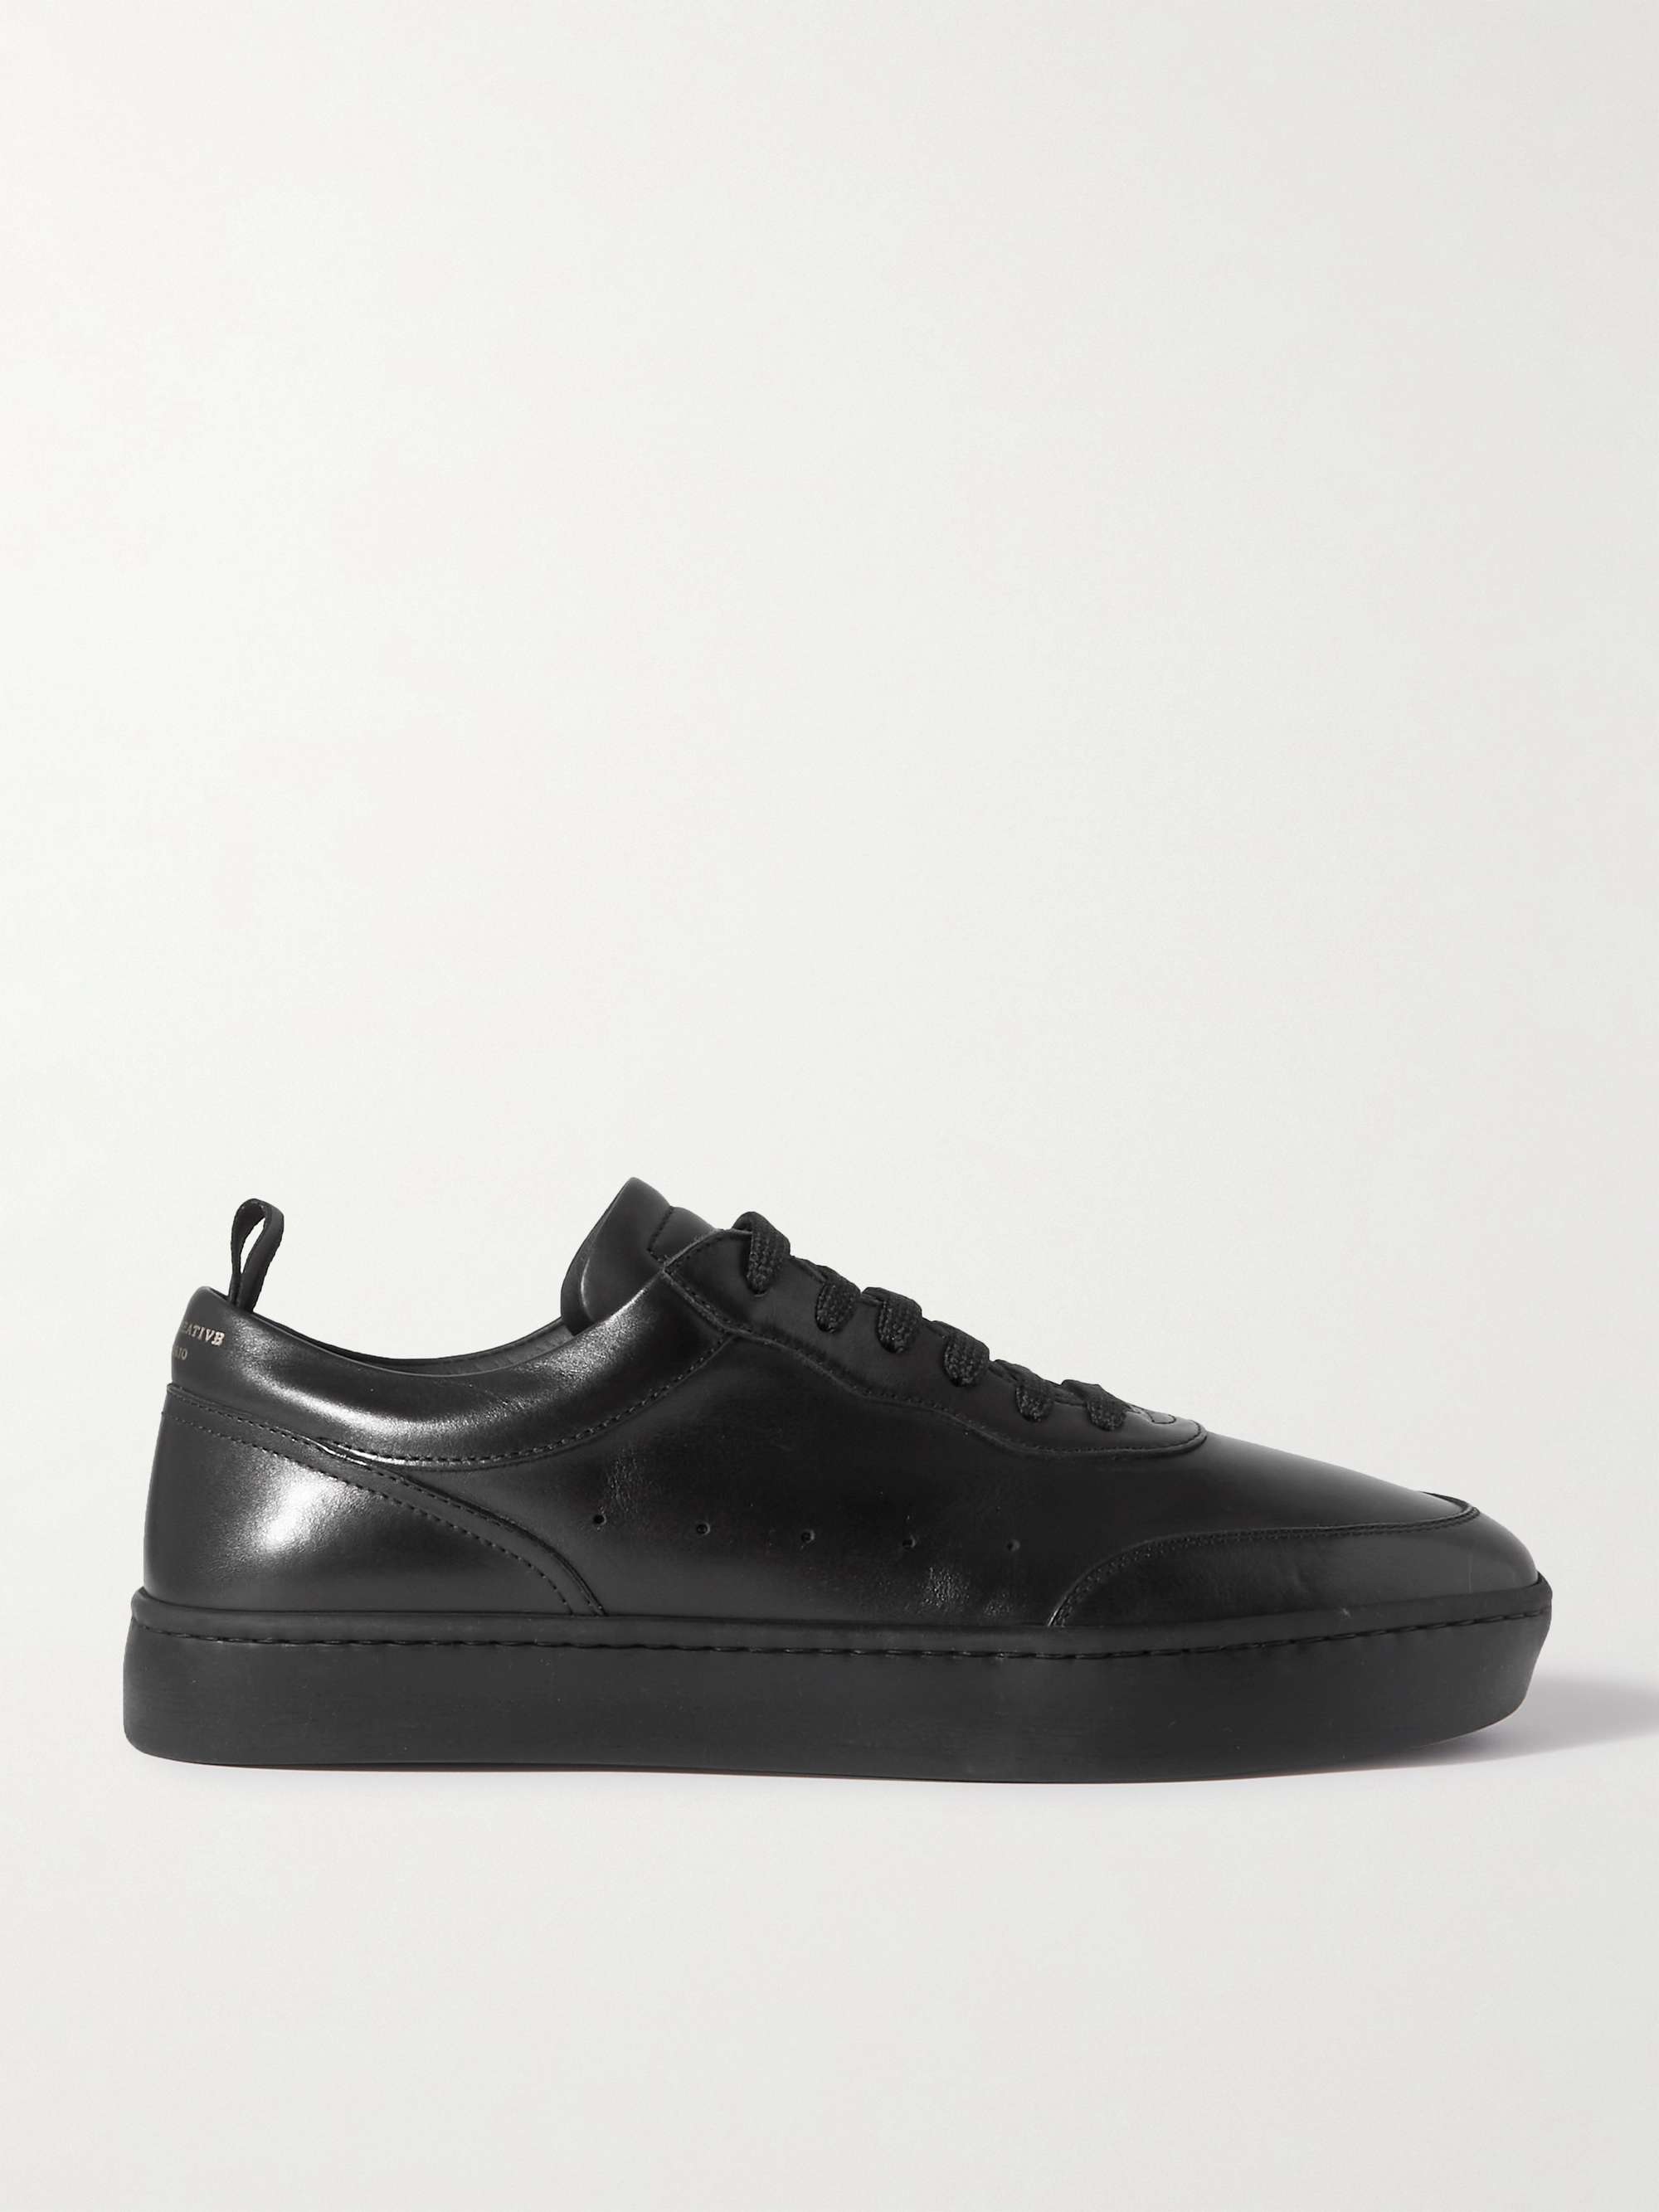 OFFICINE CREATIVE Kyle Lux Leather Sneakers for Men | MR PORTER